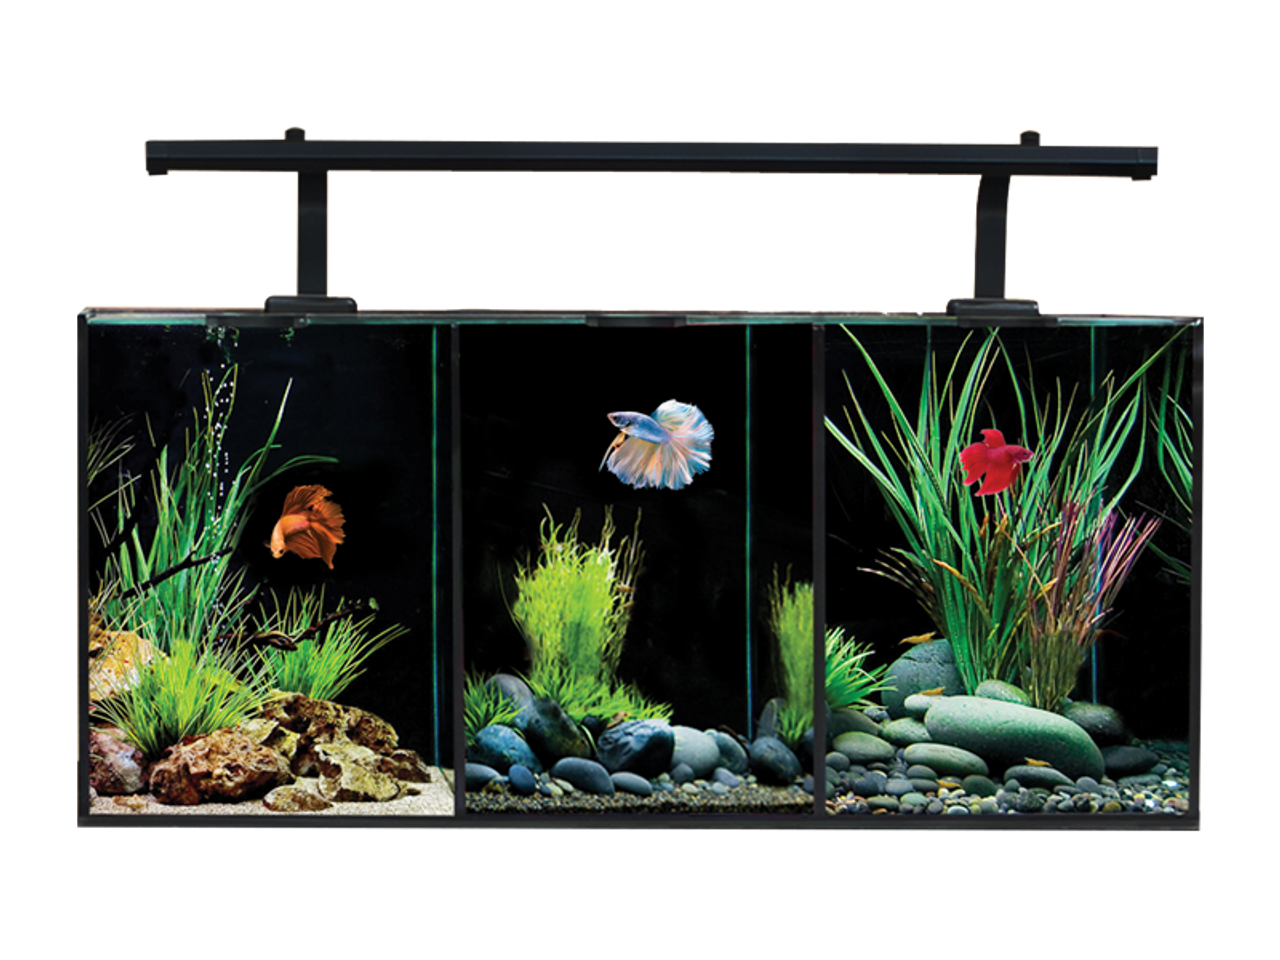 I have one betta in 10l( 2,5 gal) aquarium with hang on the back